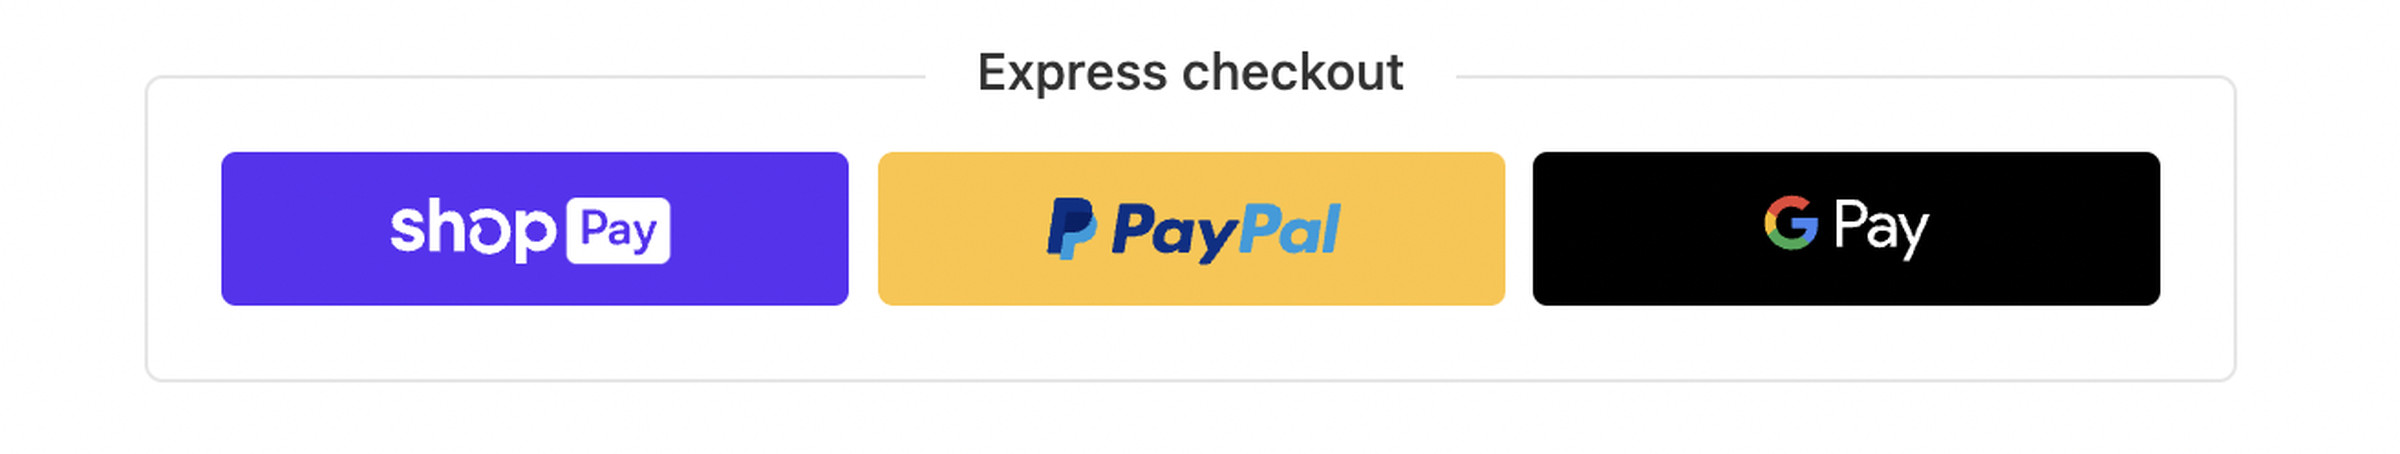 Google wants to make all purchases on the web as easy and secure as using express checkout options.